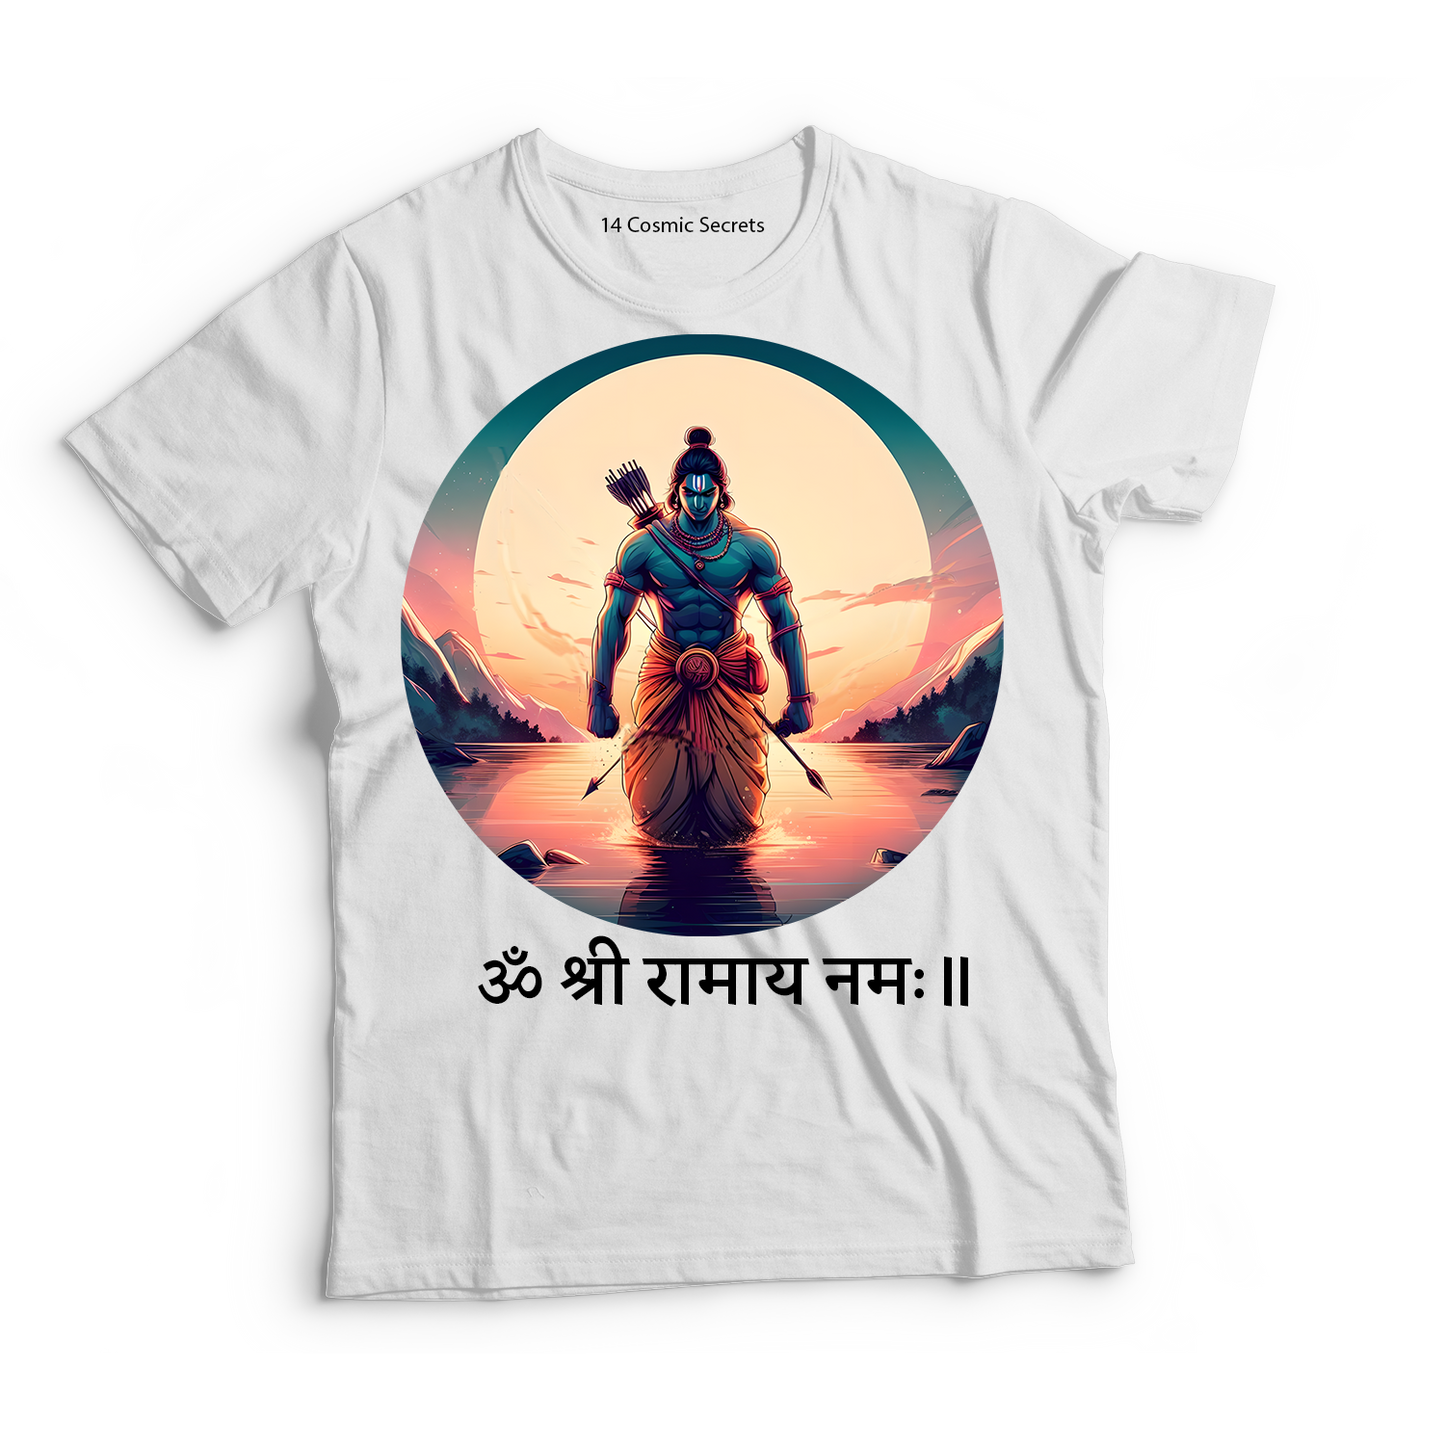 The Rama Chronicles: Tee Edition Graphic Printed T-Shirt for Men Cotton T-Shirt Original Super Heroes of India T-Shirt